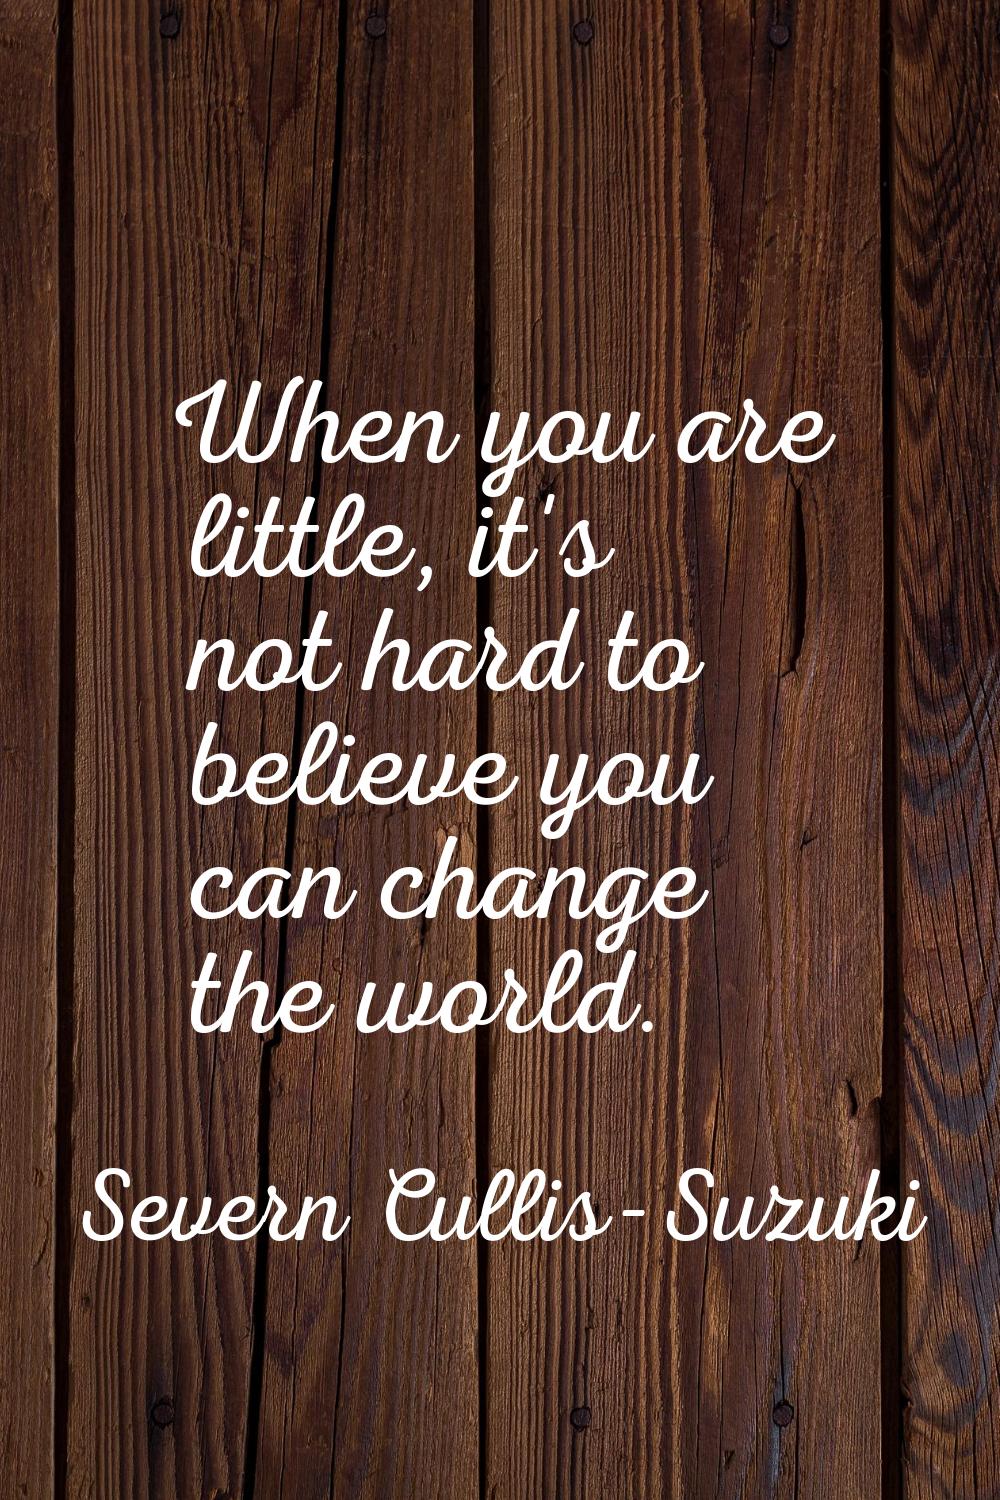 When you are little, it's not hard to believe you can change the world.